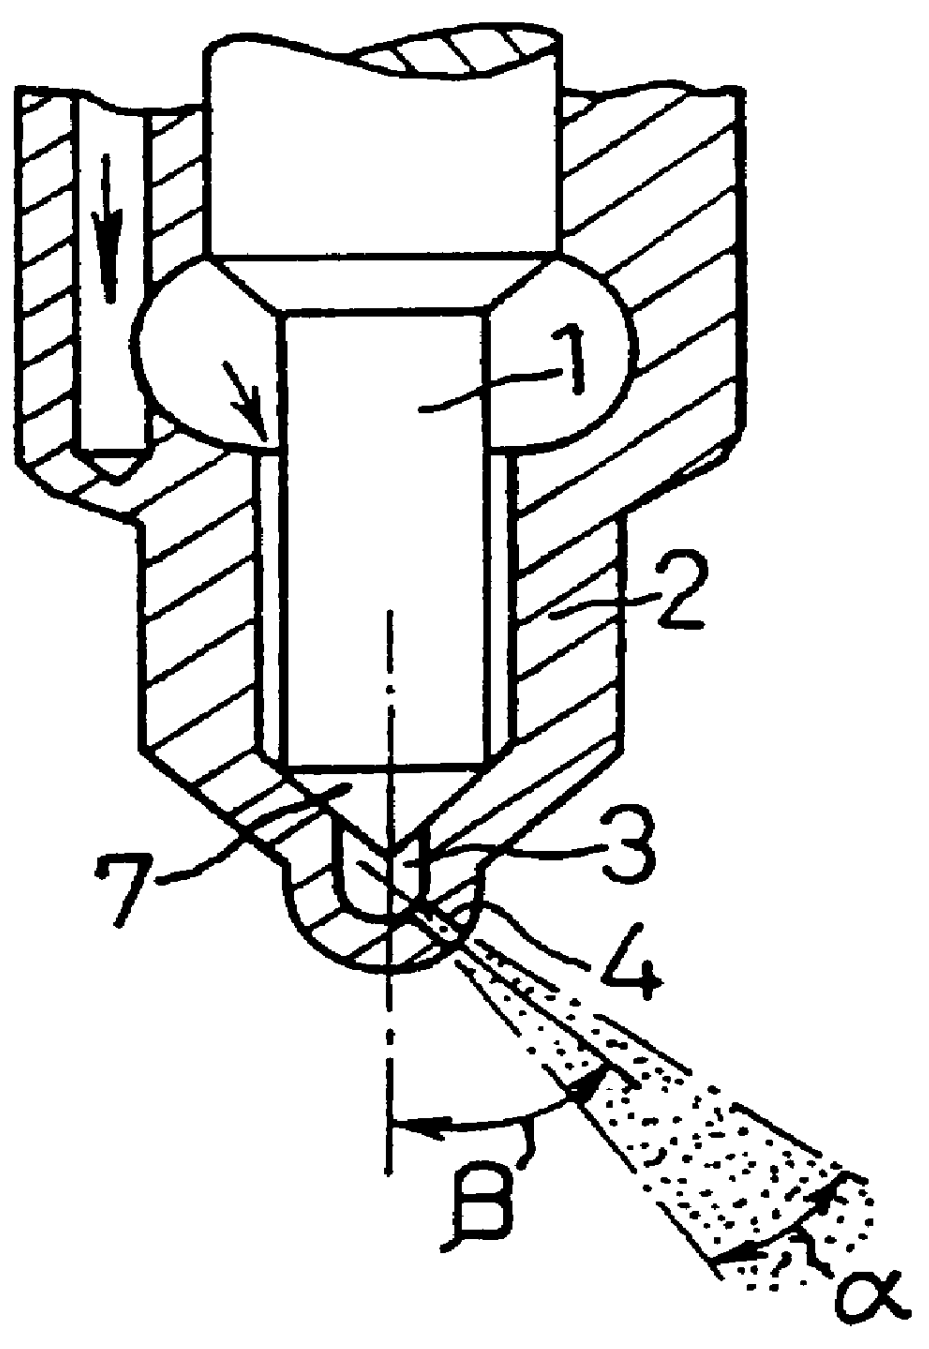 Fuel injection valve and nozzle